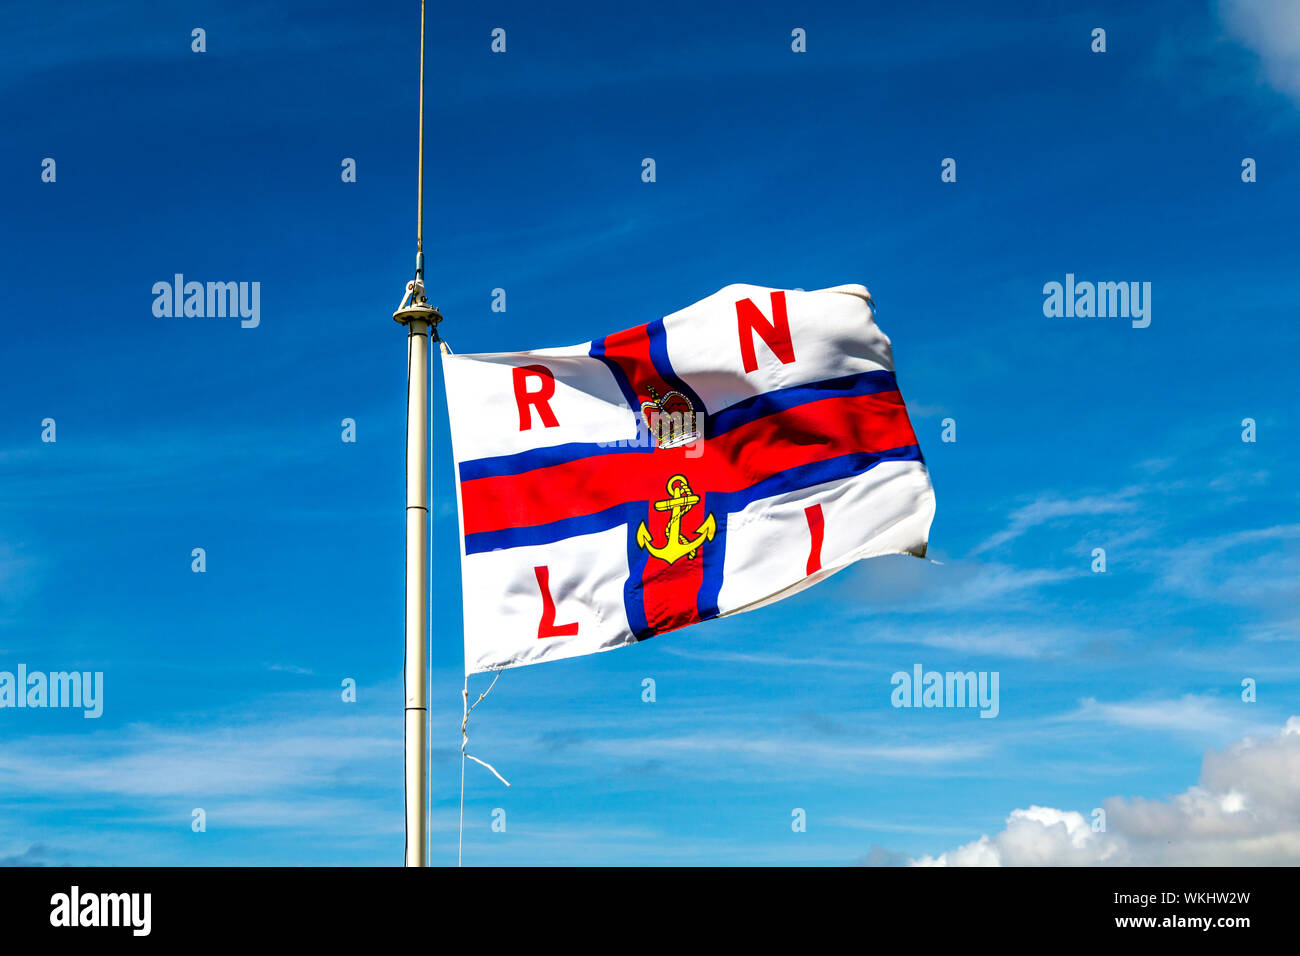 RNLI (Royal National Lifeboat Institution) flag fluttering in the wind Stock Photo